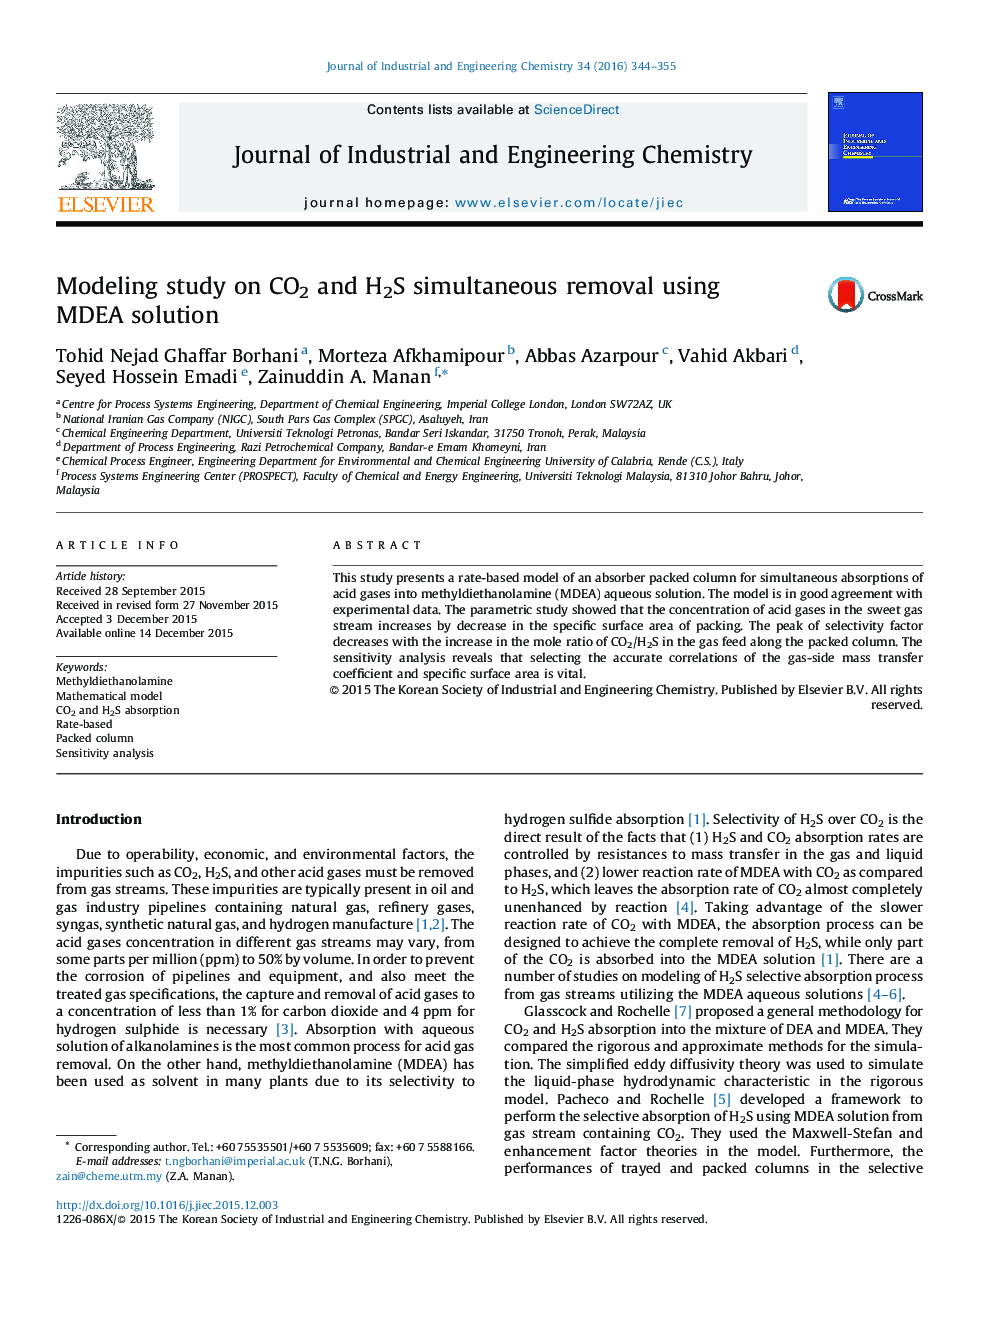 Modeling study on CO2 and H2S simultaneous removal using MDEA solution